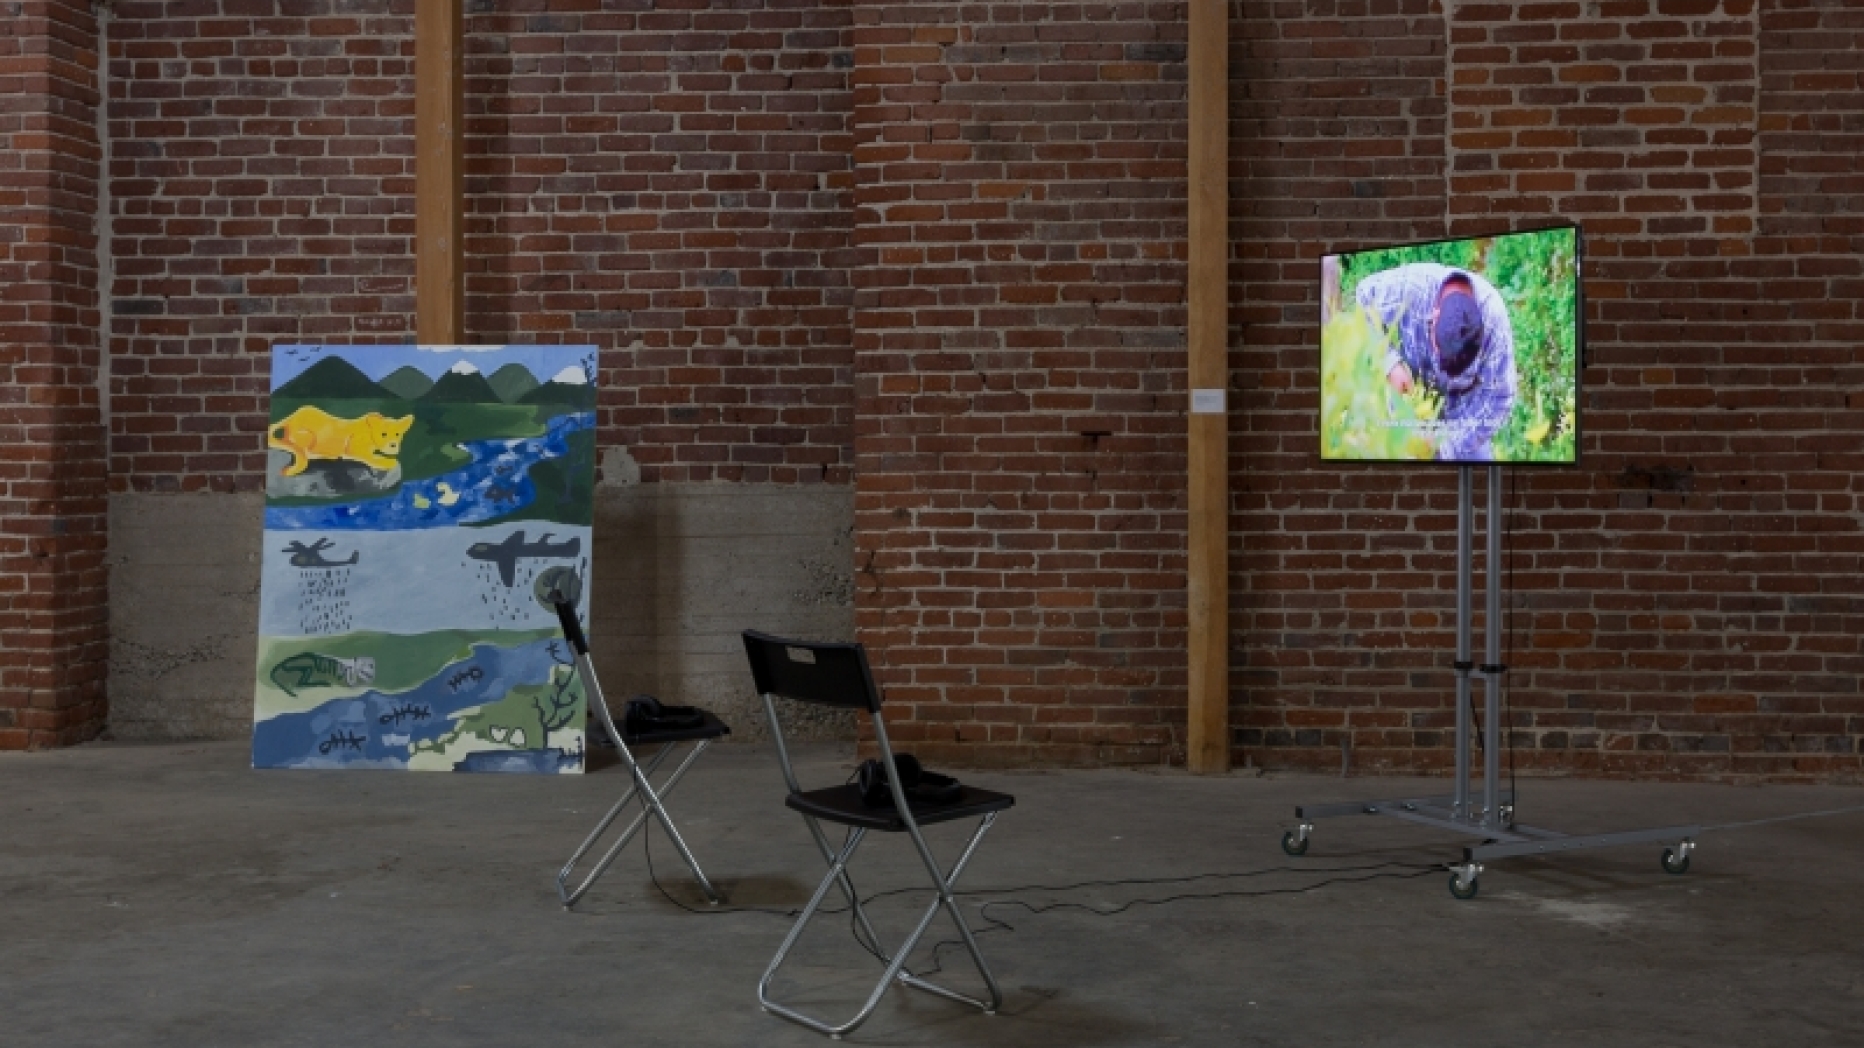 Painting and monitor showing a video.